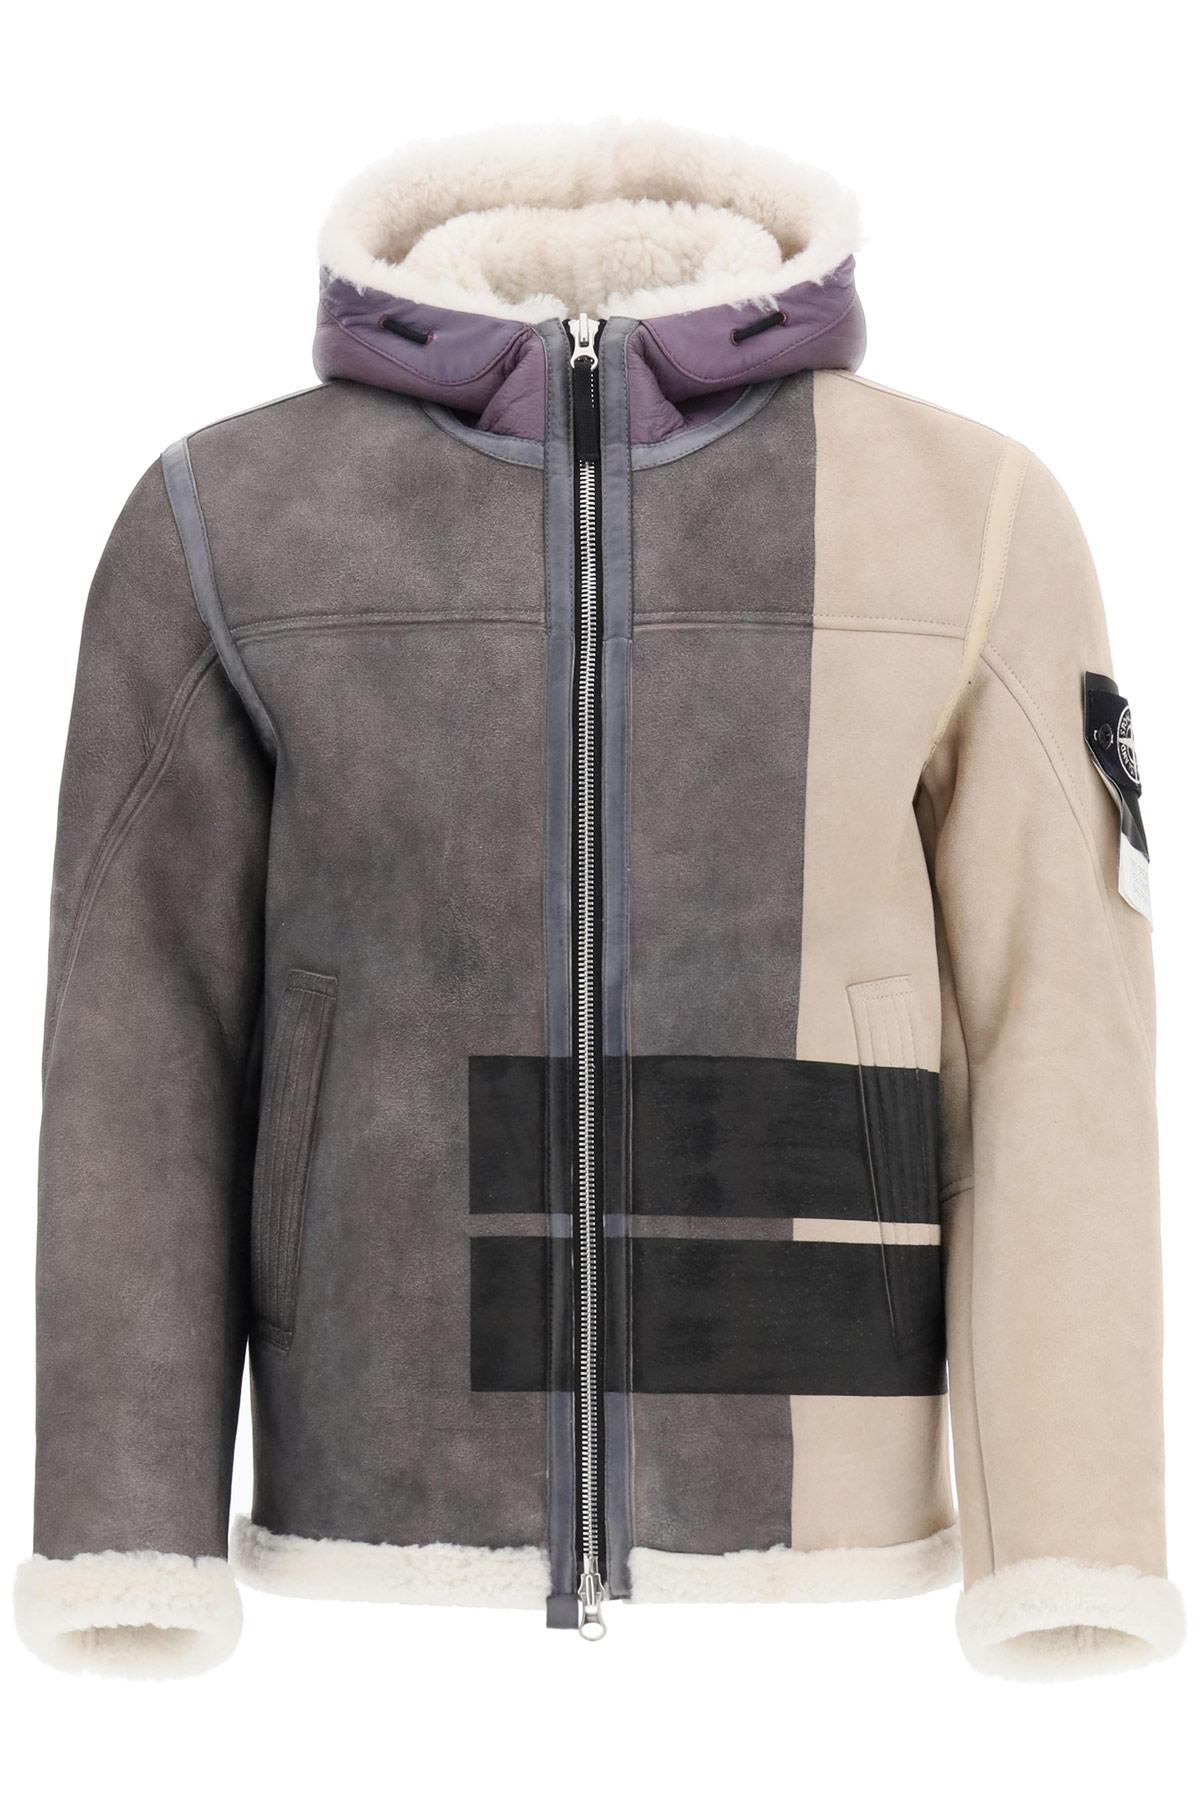 Stone Island Shearling Bomber Jacket M Fur,leather in Grey,Beige (Gray) for  Men | Lyst